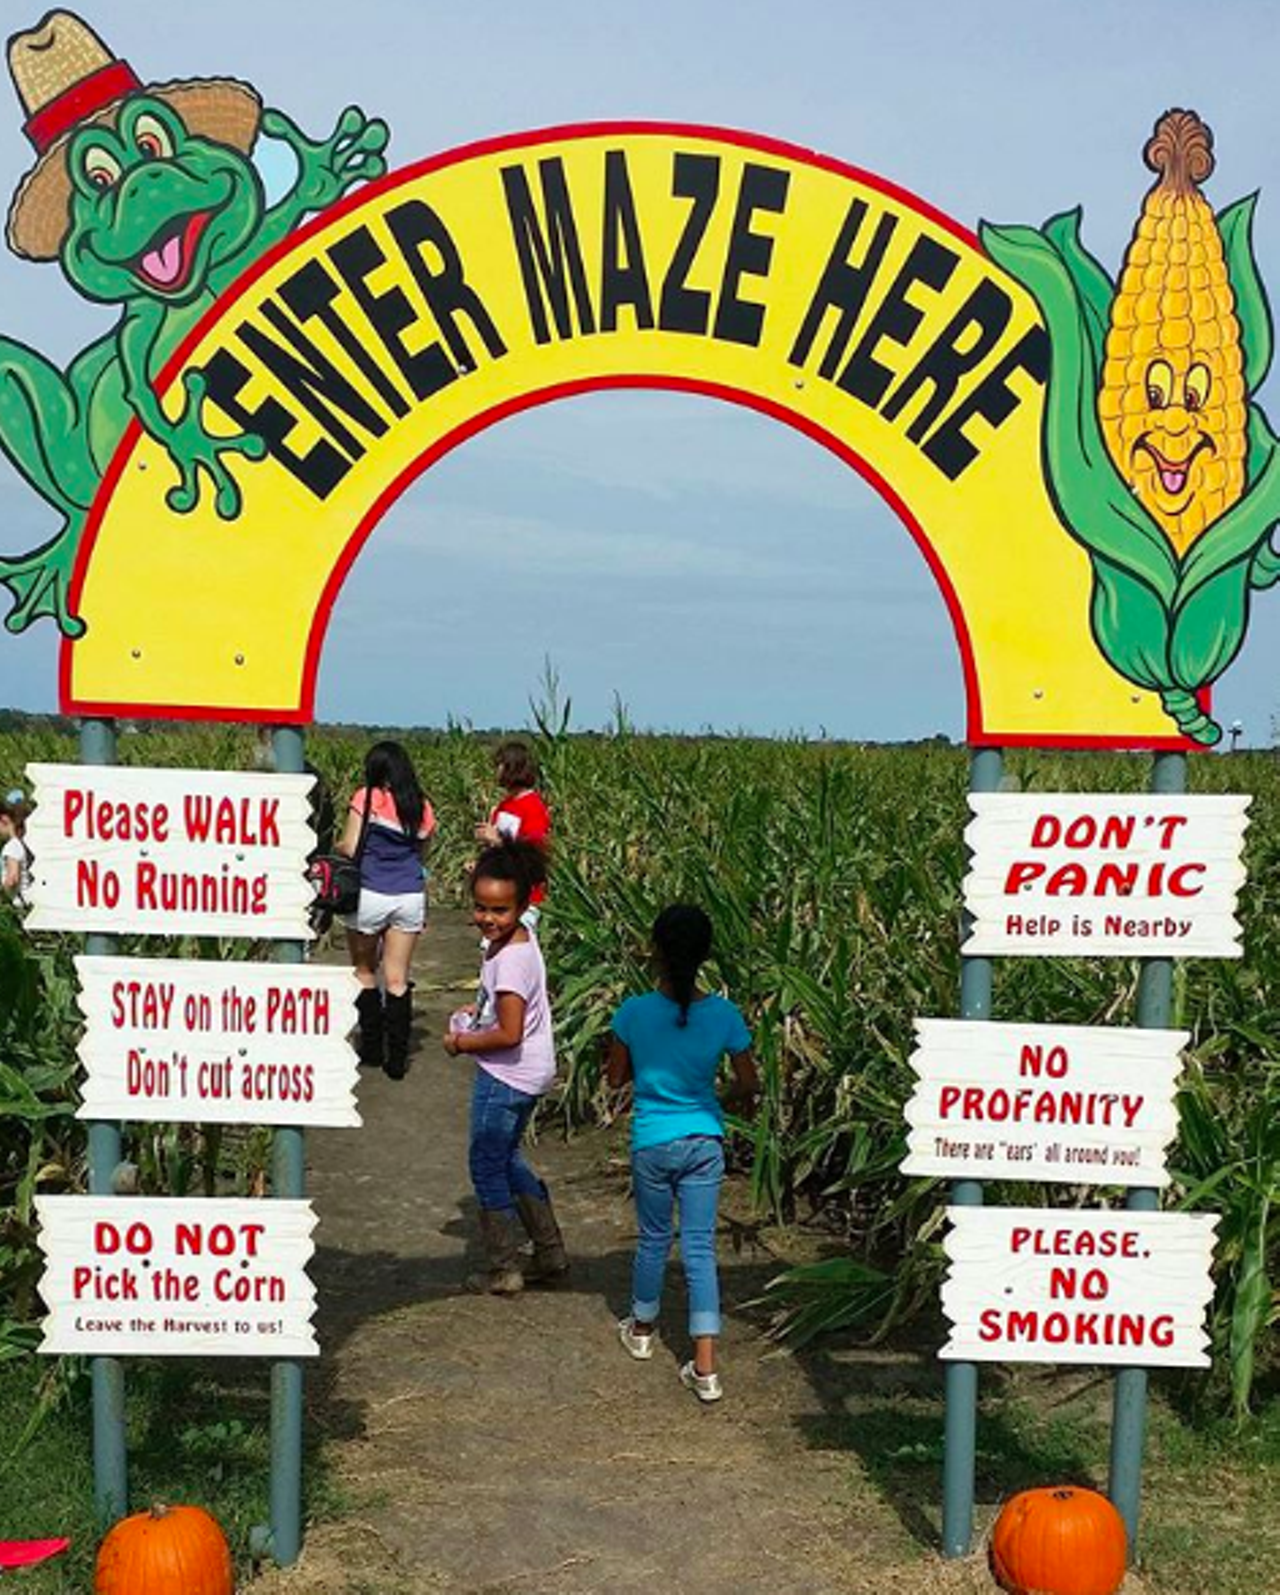 Rocky Creek Maze
784 Co Road 251, Moulton, (361) 287-2828, rockycreekmaze.com
Take a day trip Moulton for some spooky fun. On Friday and Saturday nights – from October 11 to October 26 – you can visit the haunted trail, complete with ghosts and ghouls. After Halloween, the trail is much calmer with carriages, camels and more throughout the maze on November 2 and 3.
Photo via Instagram / des_herrera